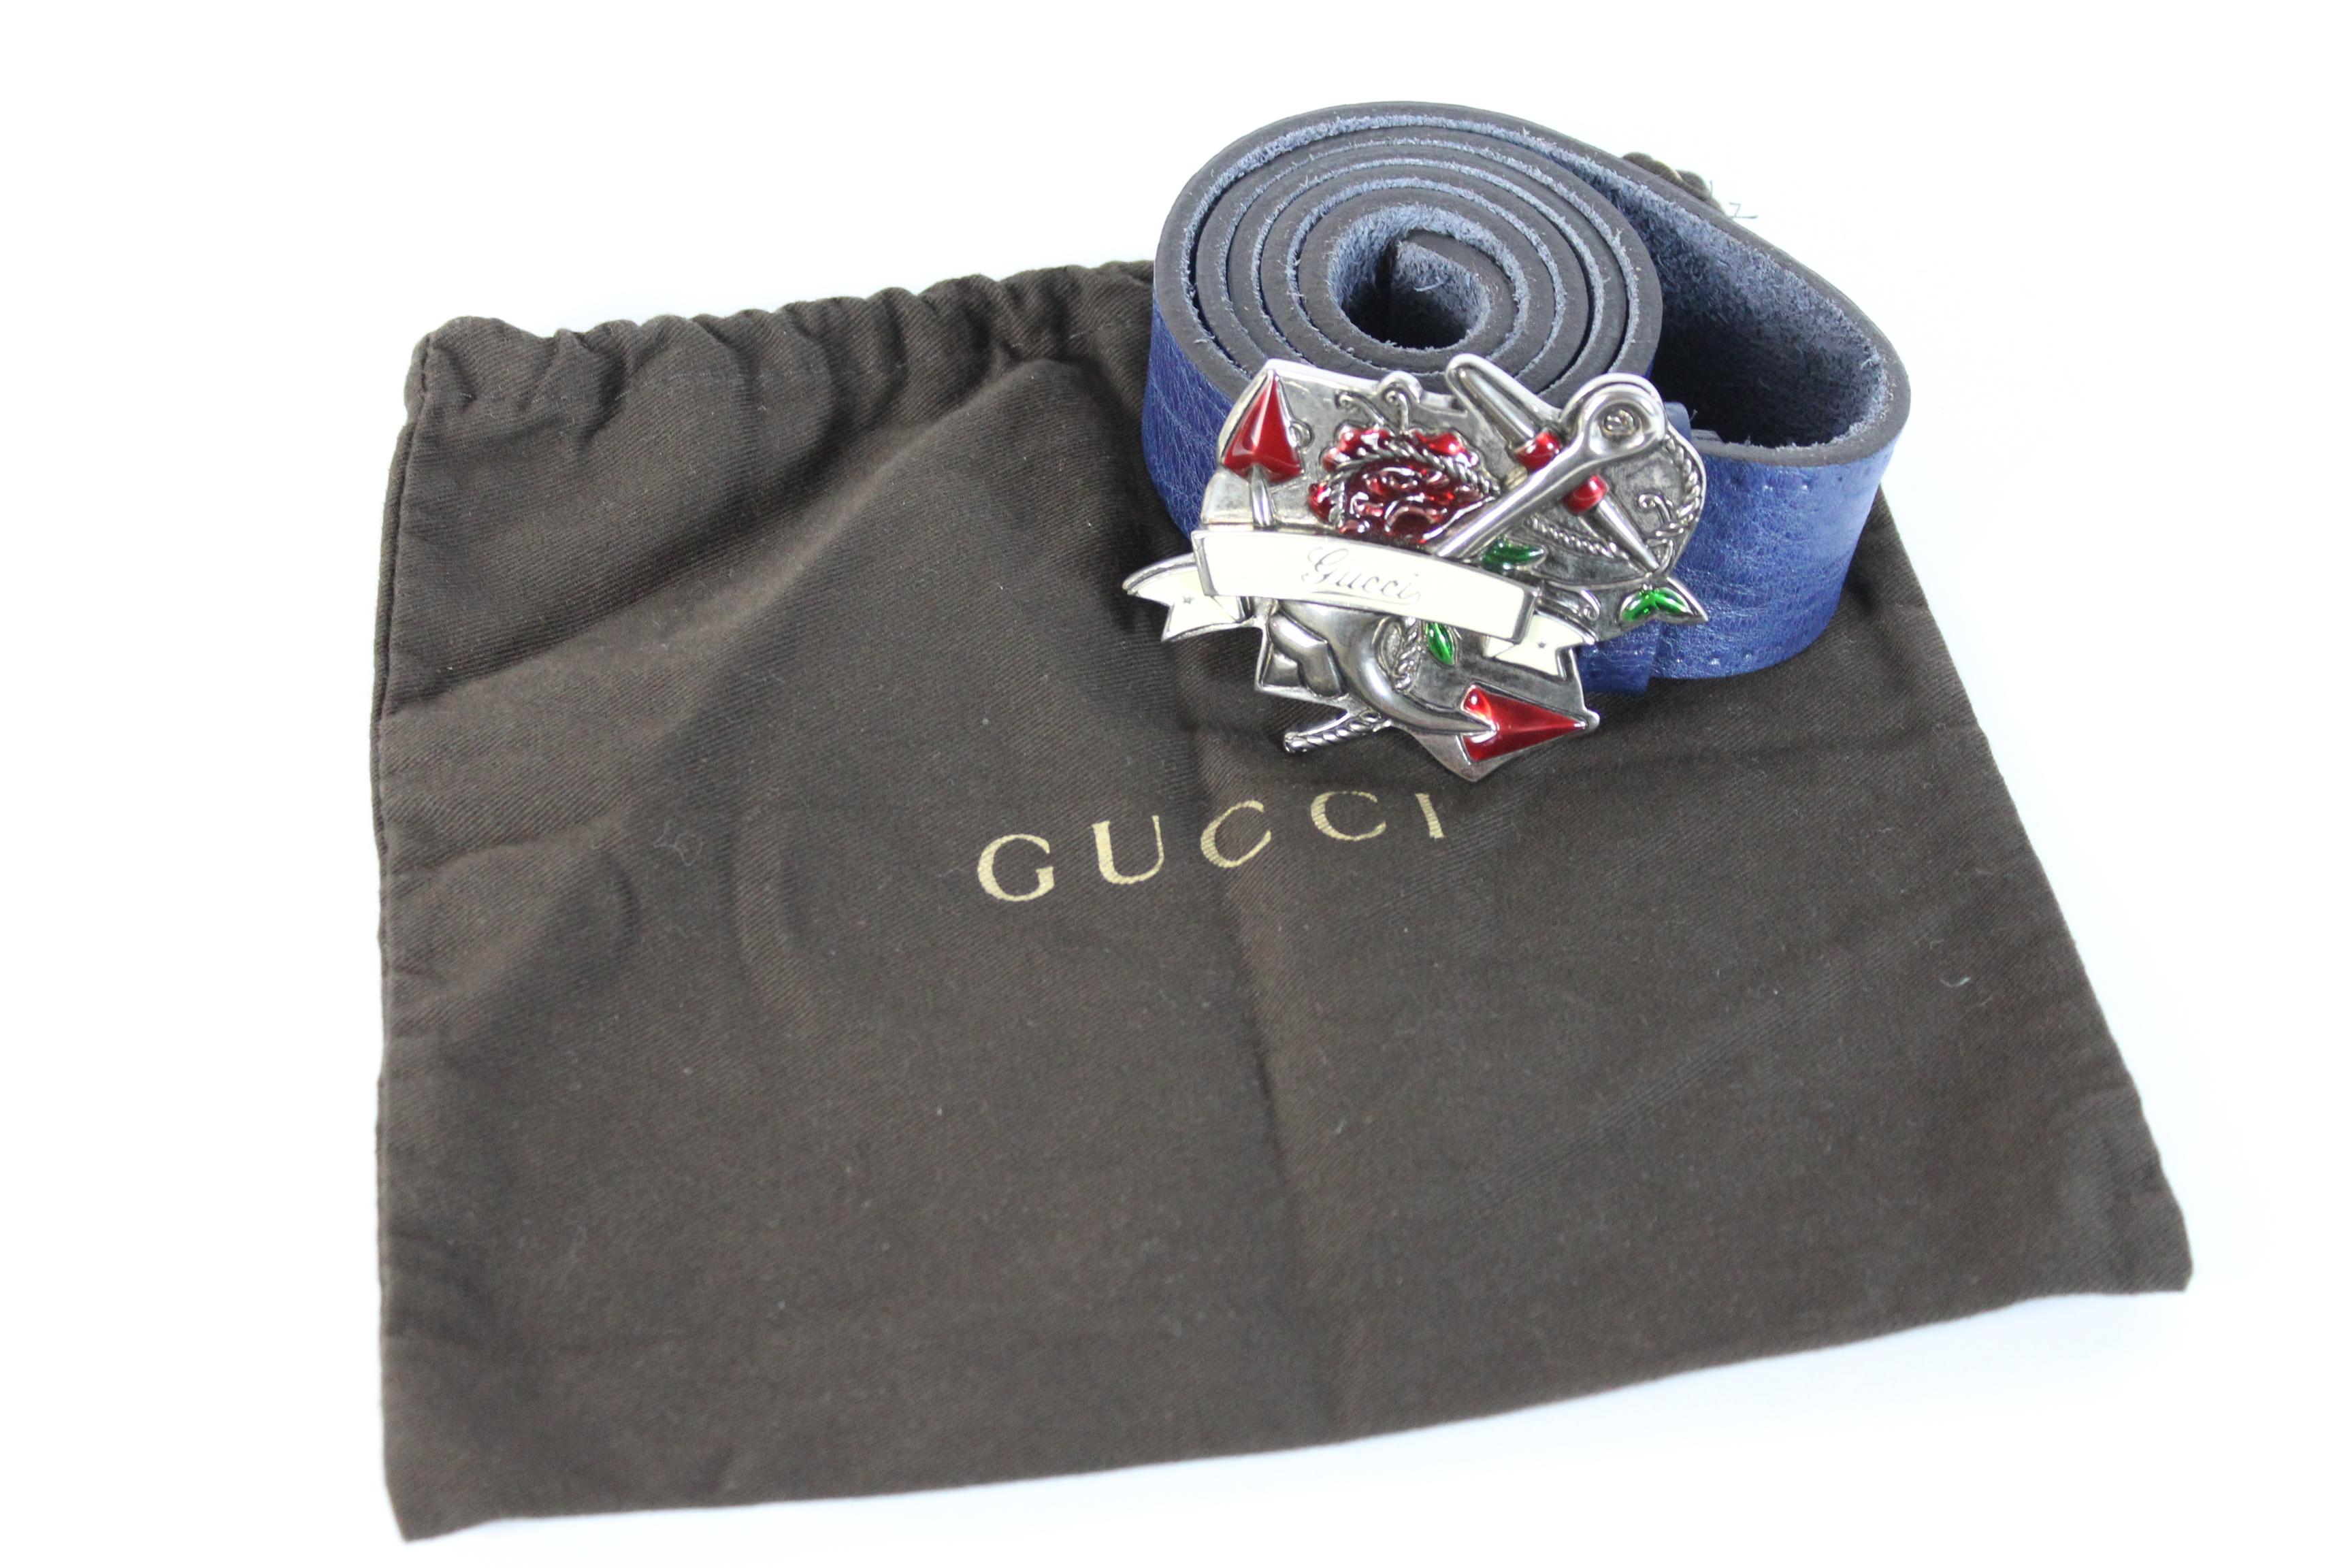 Gucci 90s vintage belt. Blue color, silver color buckle with green, red and beige anchor. 100% leather. Made in Italy. Excellent vintage condition. Original dustbag included.

Code: 497717

Size: 90/36

Length: 102 cm
Width: 4 cm